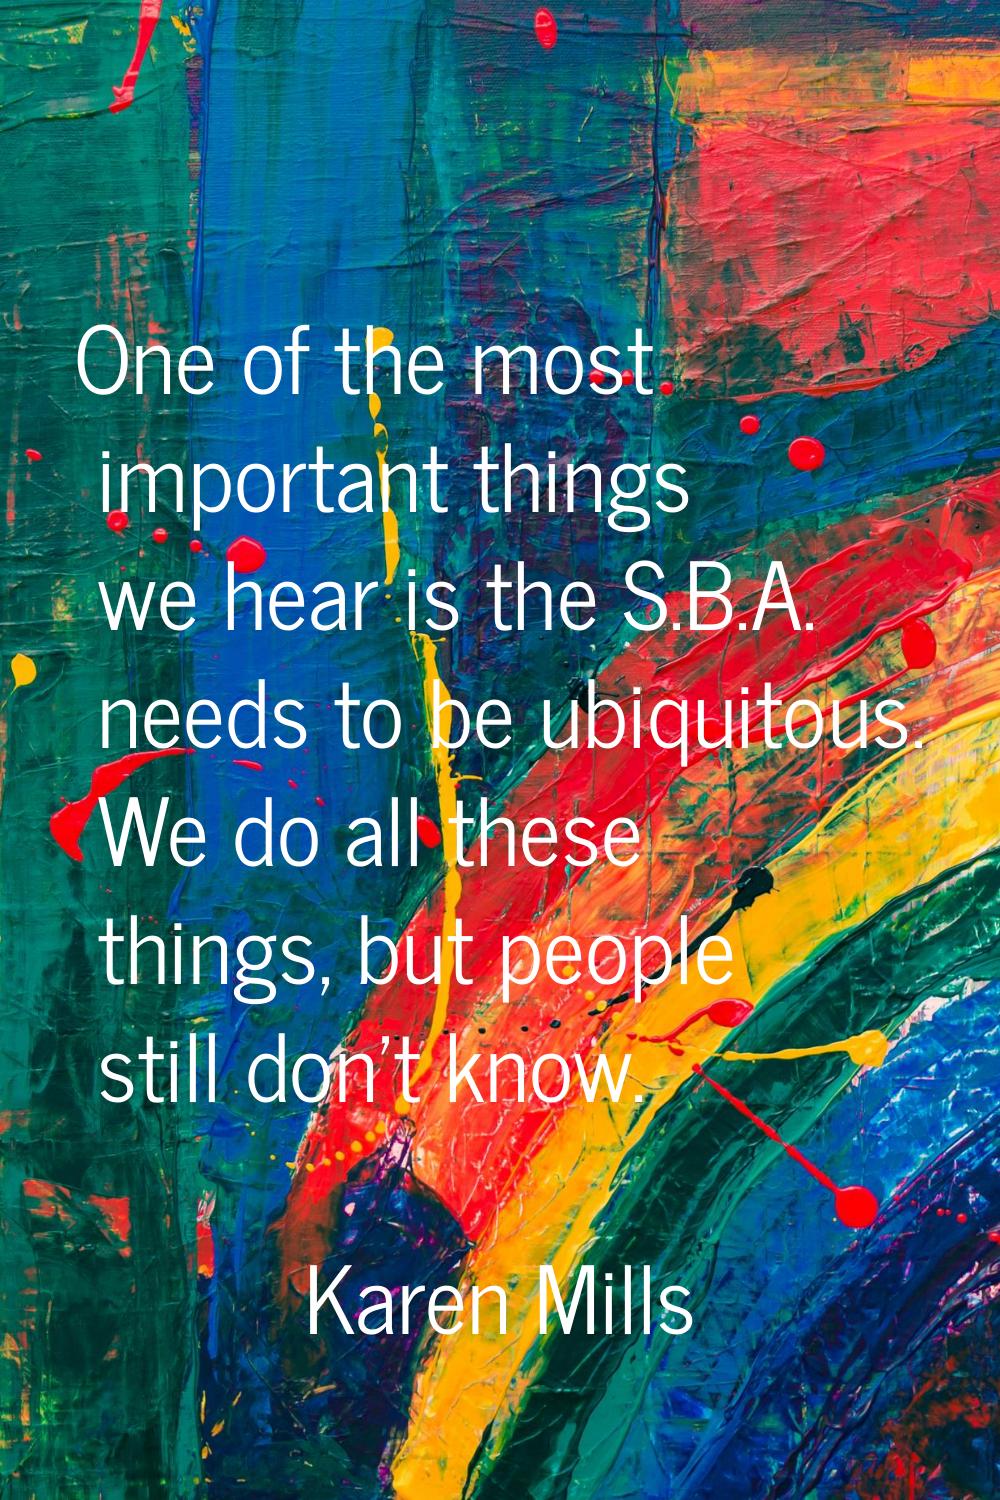 One of the most important things we hear is the S.B.A. needs to be ubiquitous. We do all these thin